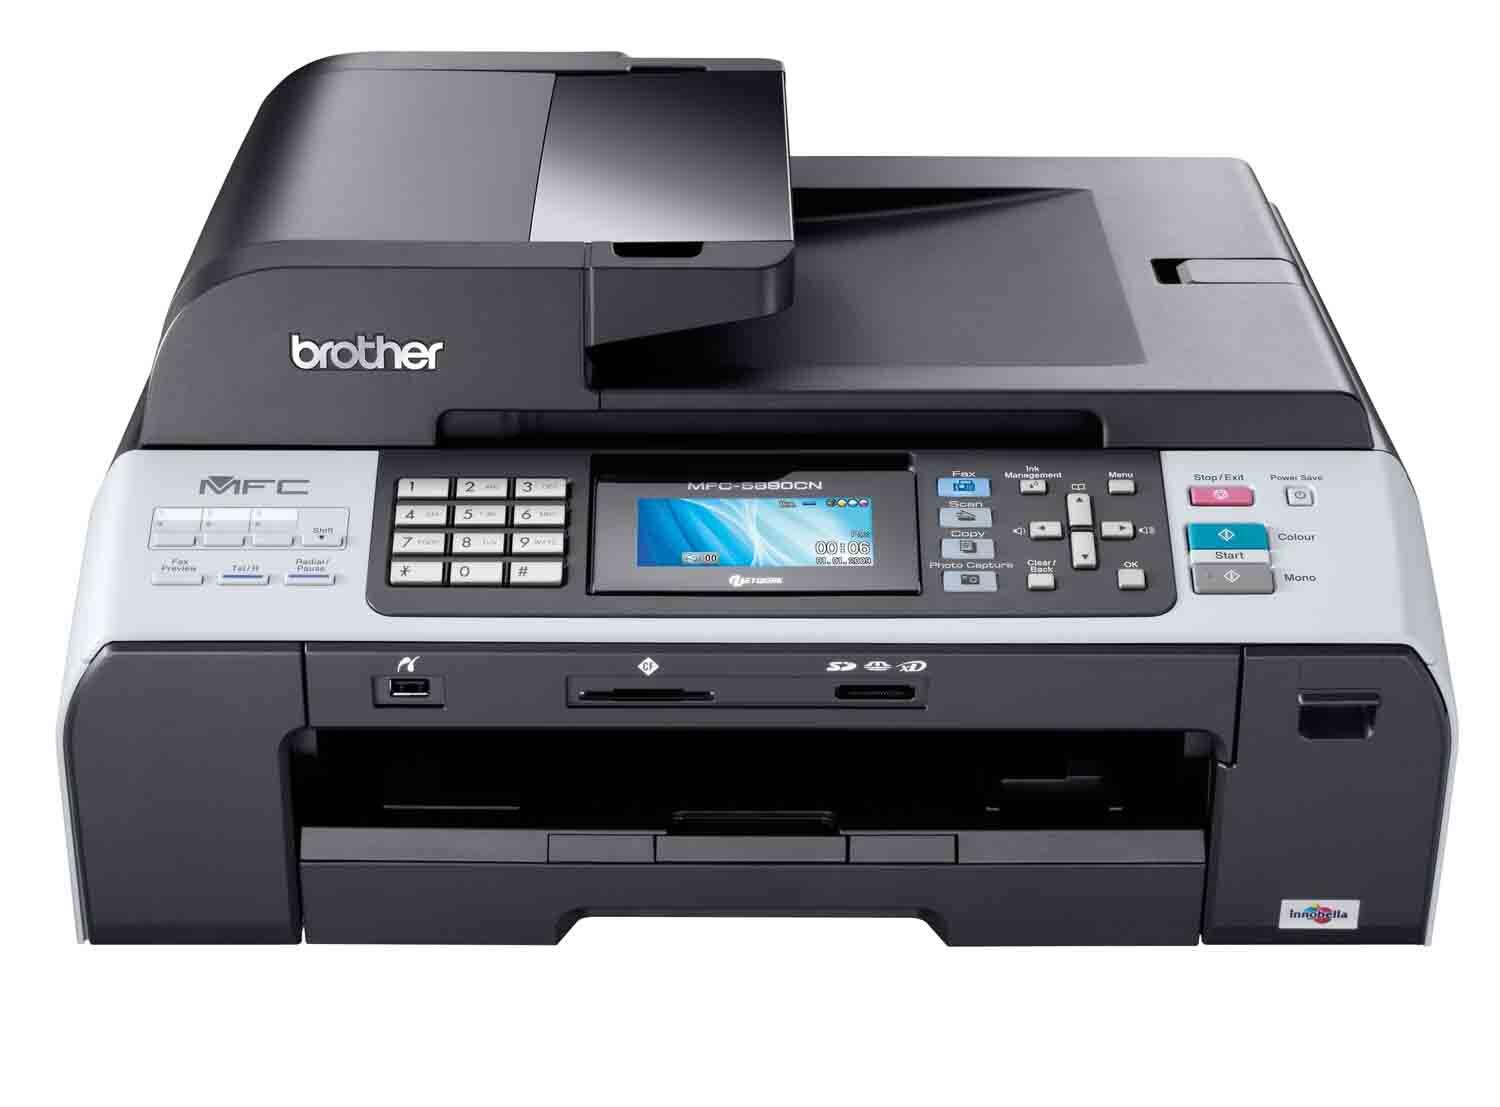 Brother MFC-5890 CN